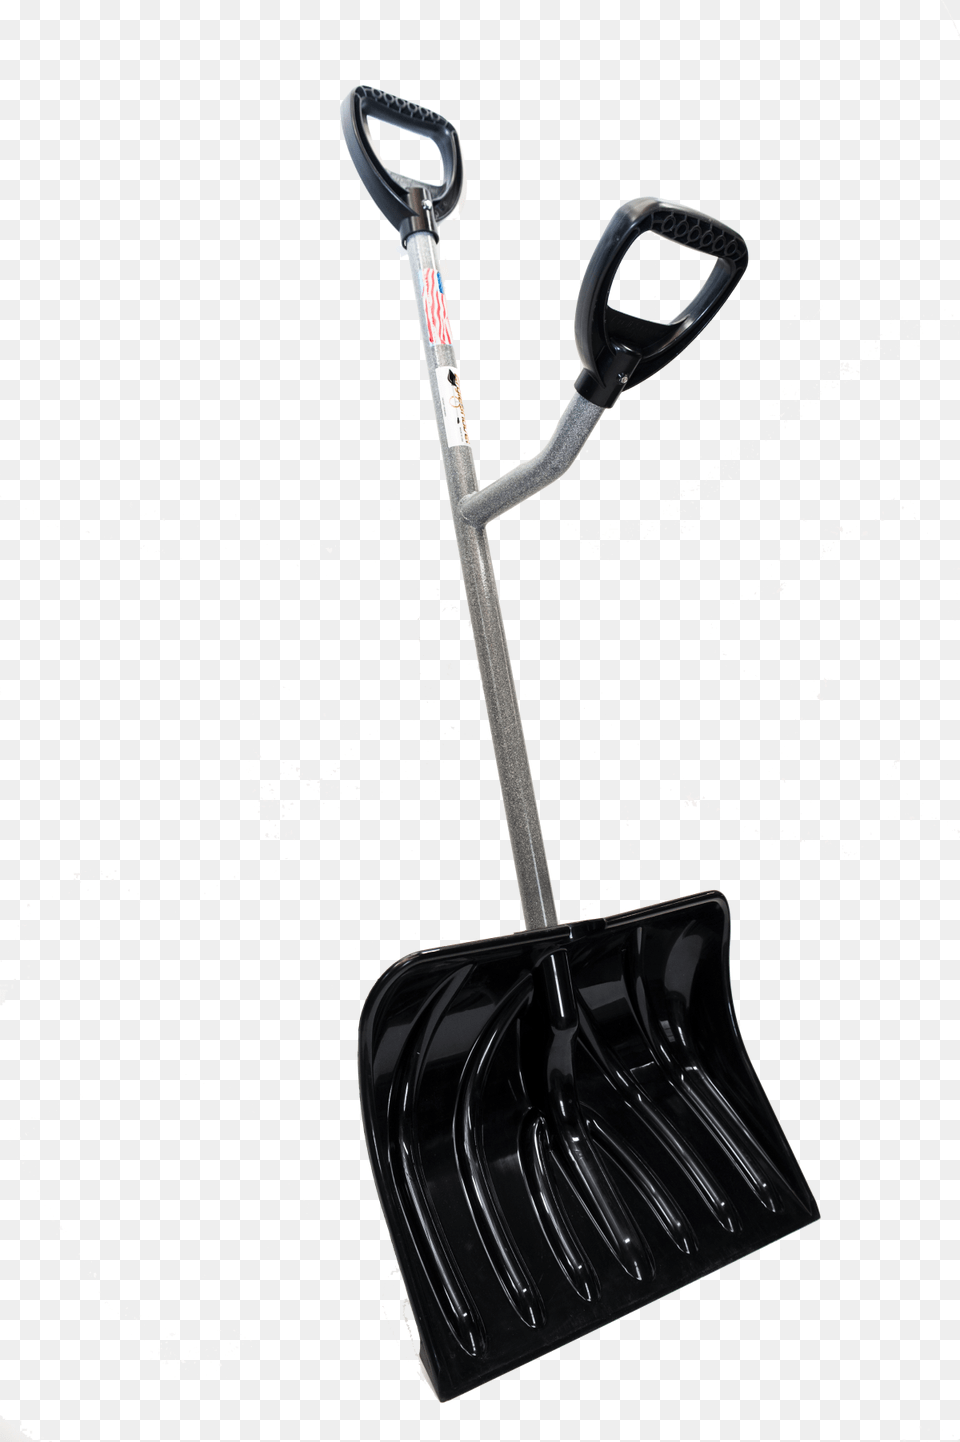 Snow Shovel With Two Handles, Device, Tool, Smoke Pipe Png Image